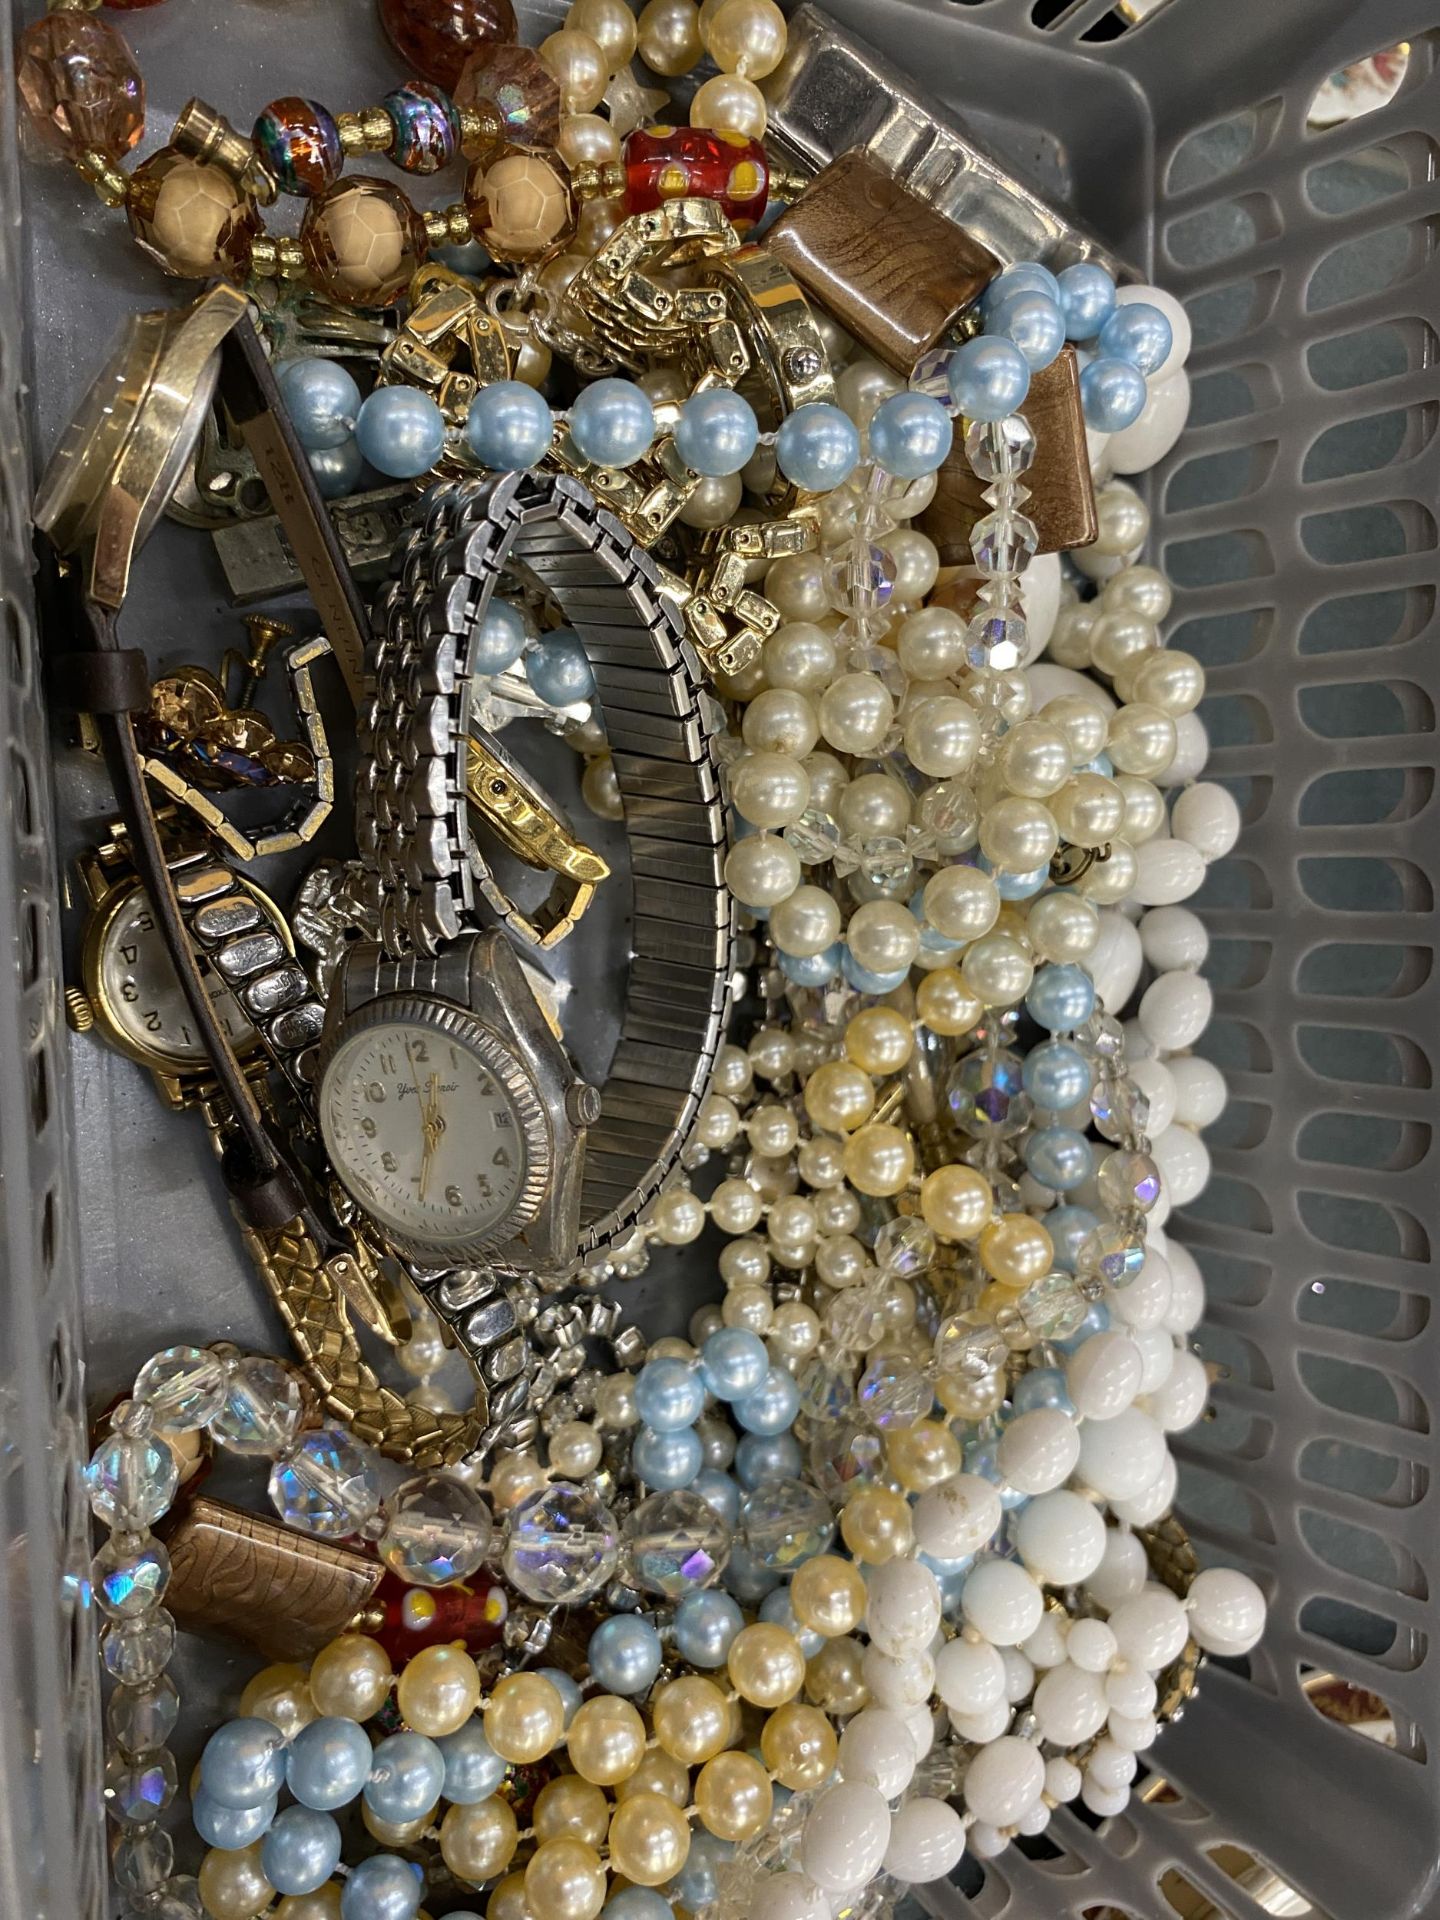 A QUANTITY OF COSTUME JEWELLERY TO INCLUDE BROOCHES, WATCHES, EARRINGS, NECKLACES, A COMPACT, - Image 3 of 3